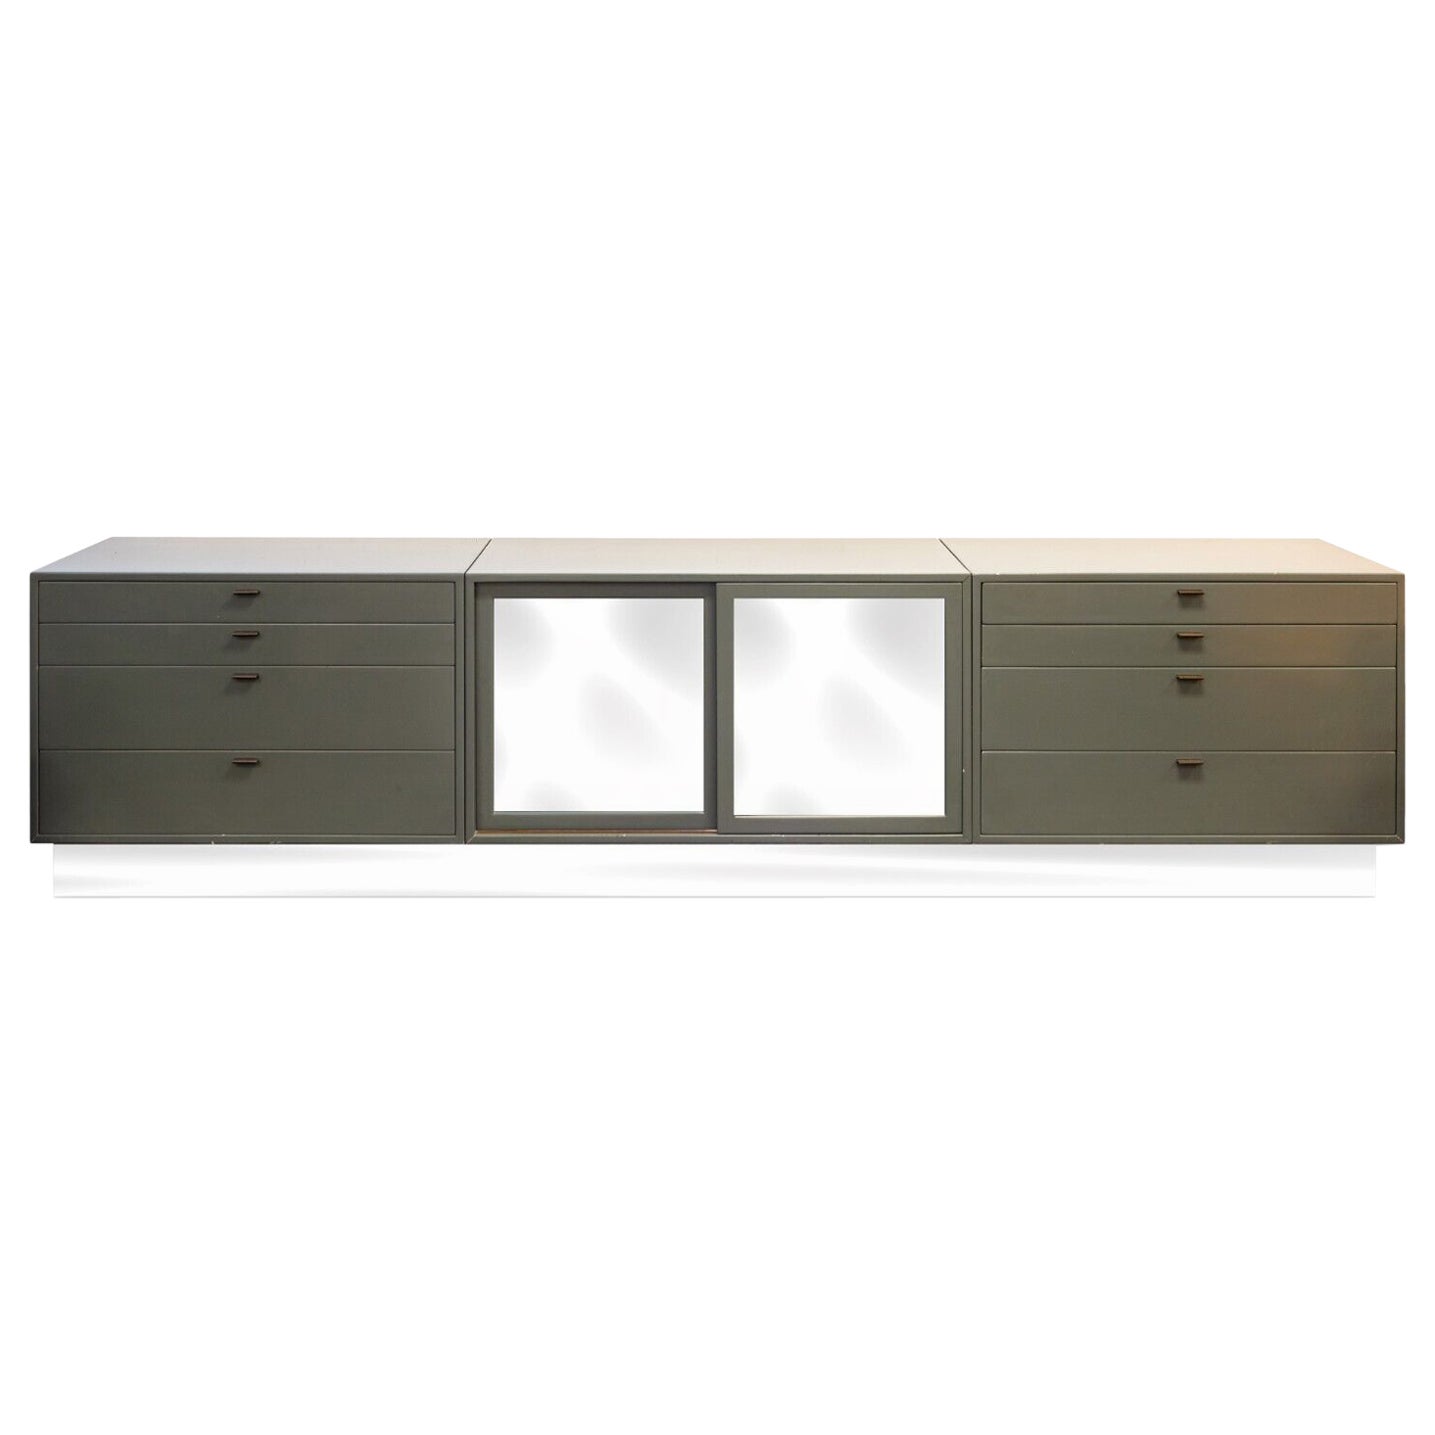 Harvery Probber Post Modern 3pc Lacquered Credenza with Custom Mirrored Base